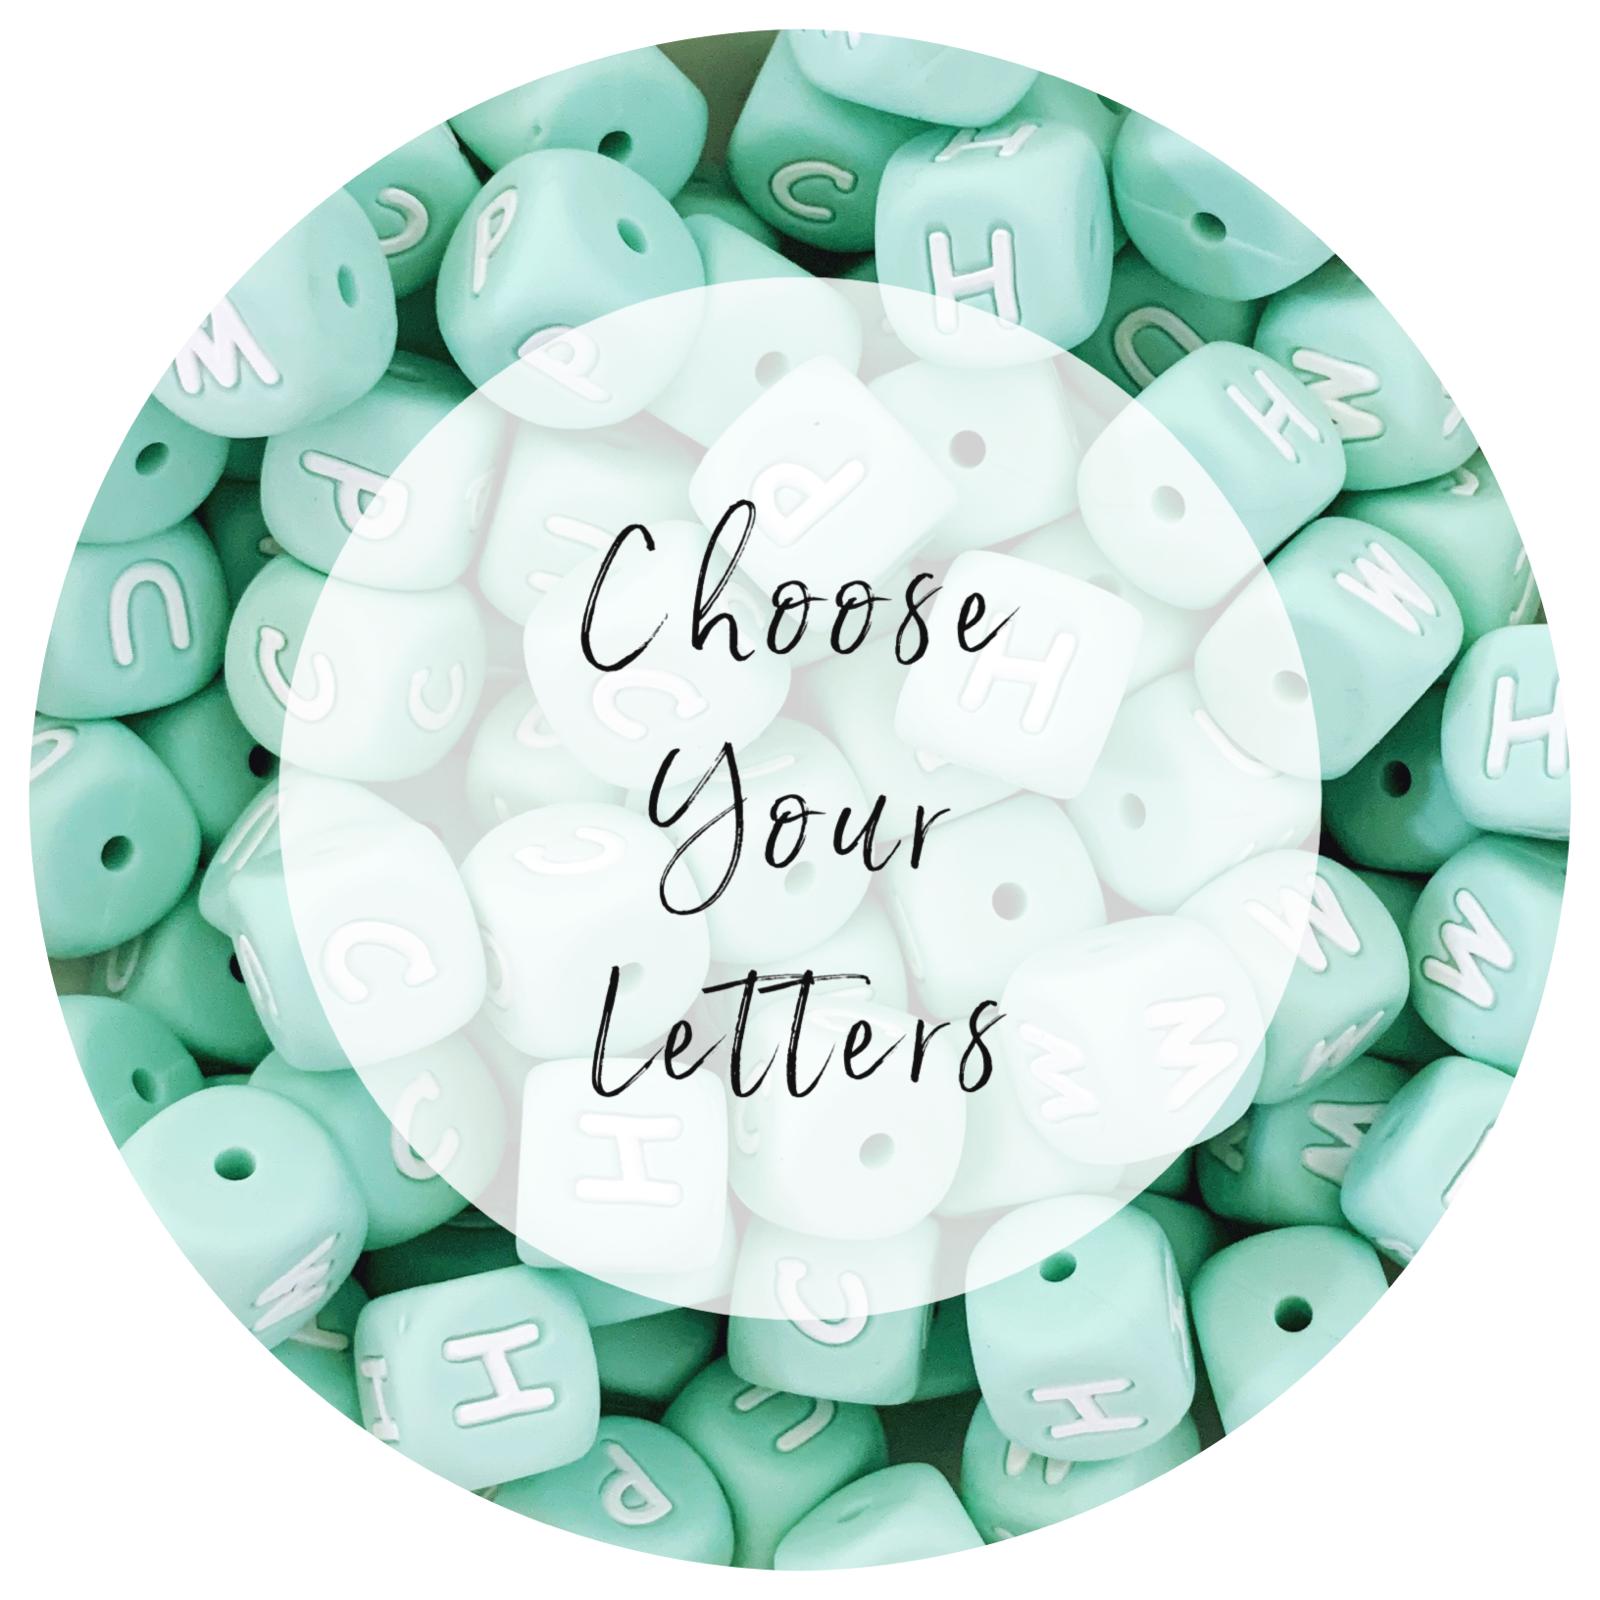 12mm Mint Green Silicone Letter Beads - Choose Your Letters - Each